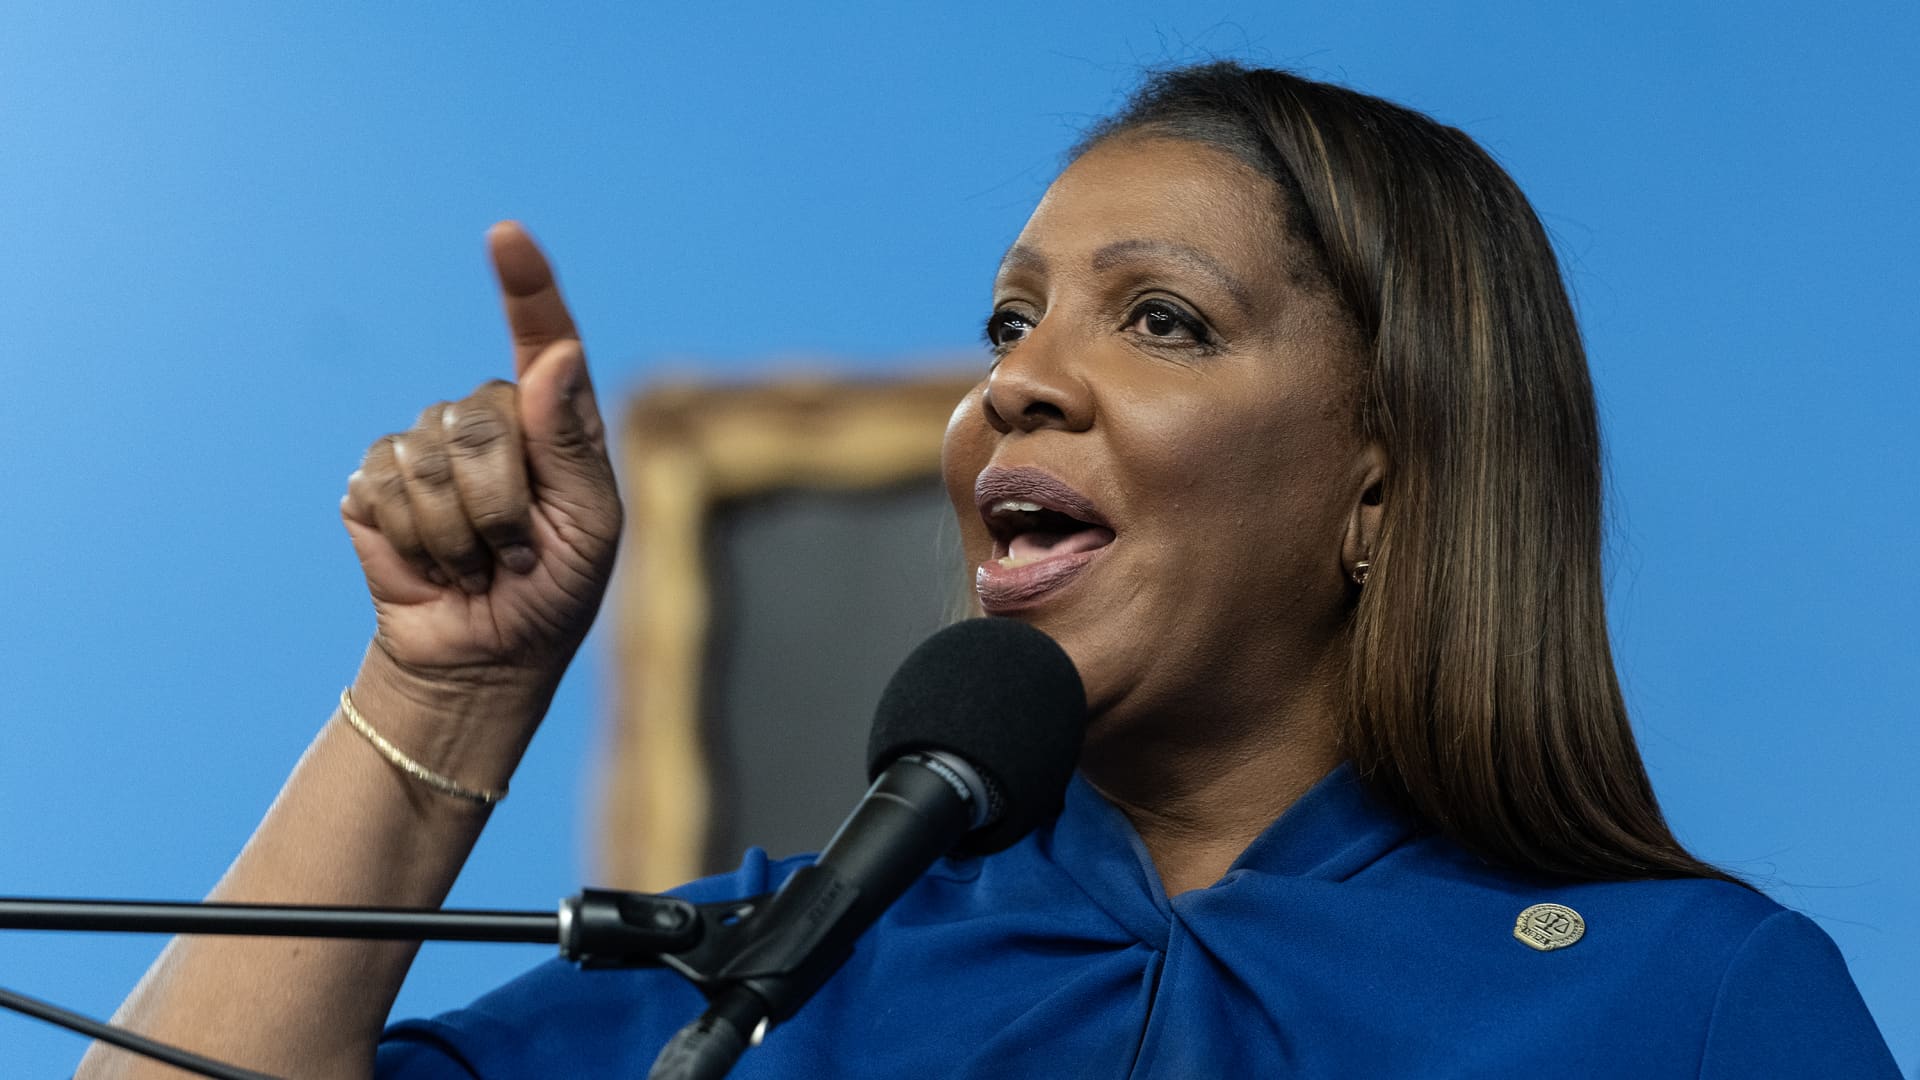 NY AG Letitia James presses MSG over use of facial recognition technology - CNBC (Picture 1)